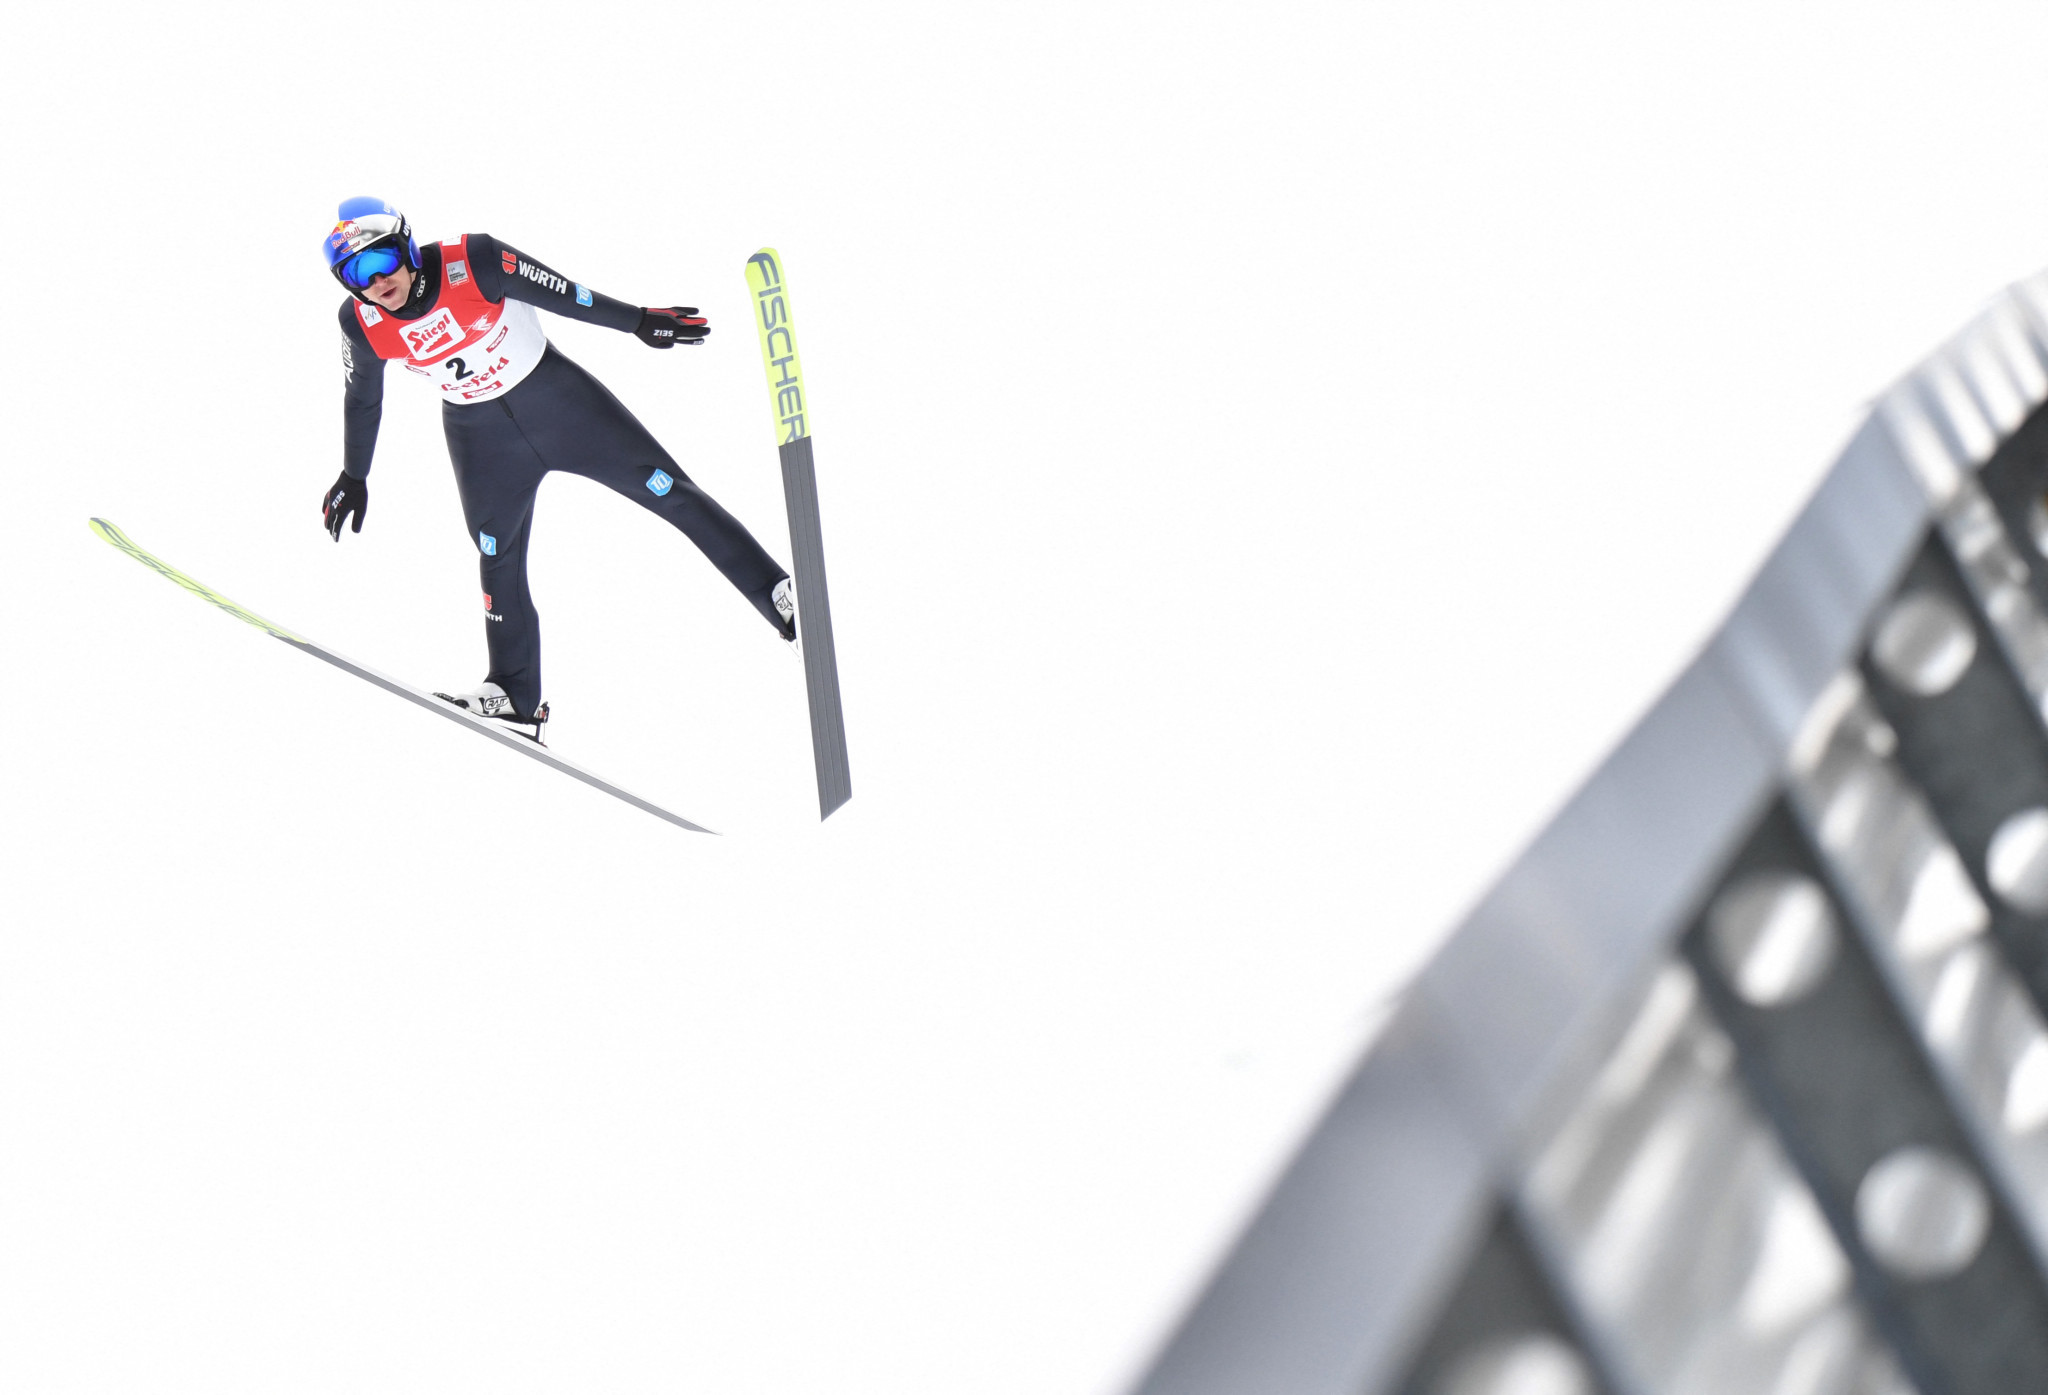 Geiger takes Nordic Combined World Cup victory in windy Seefeld